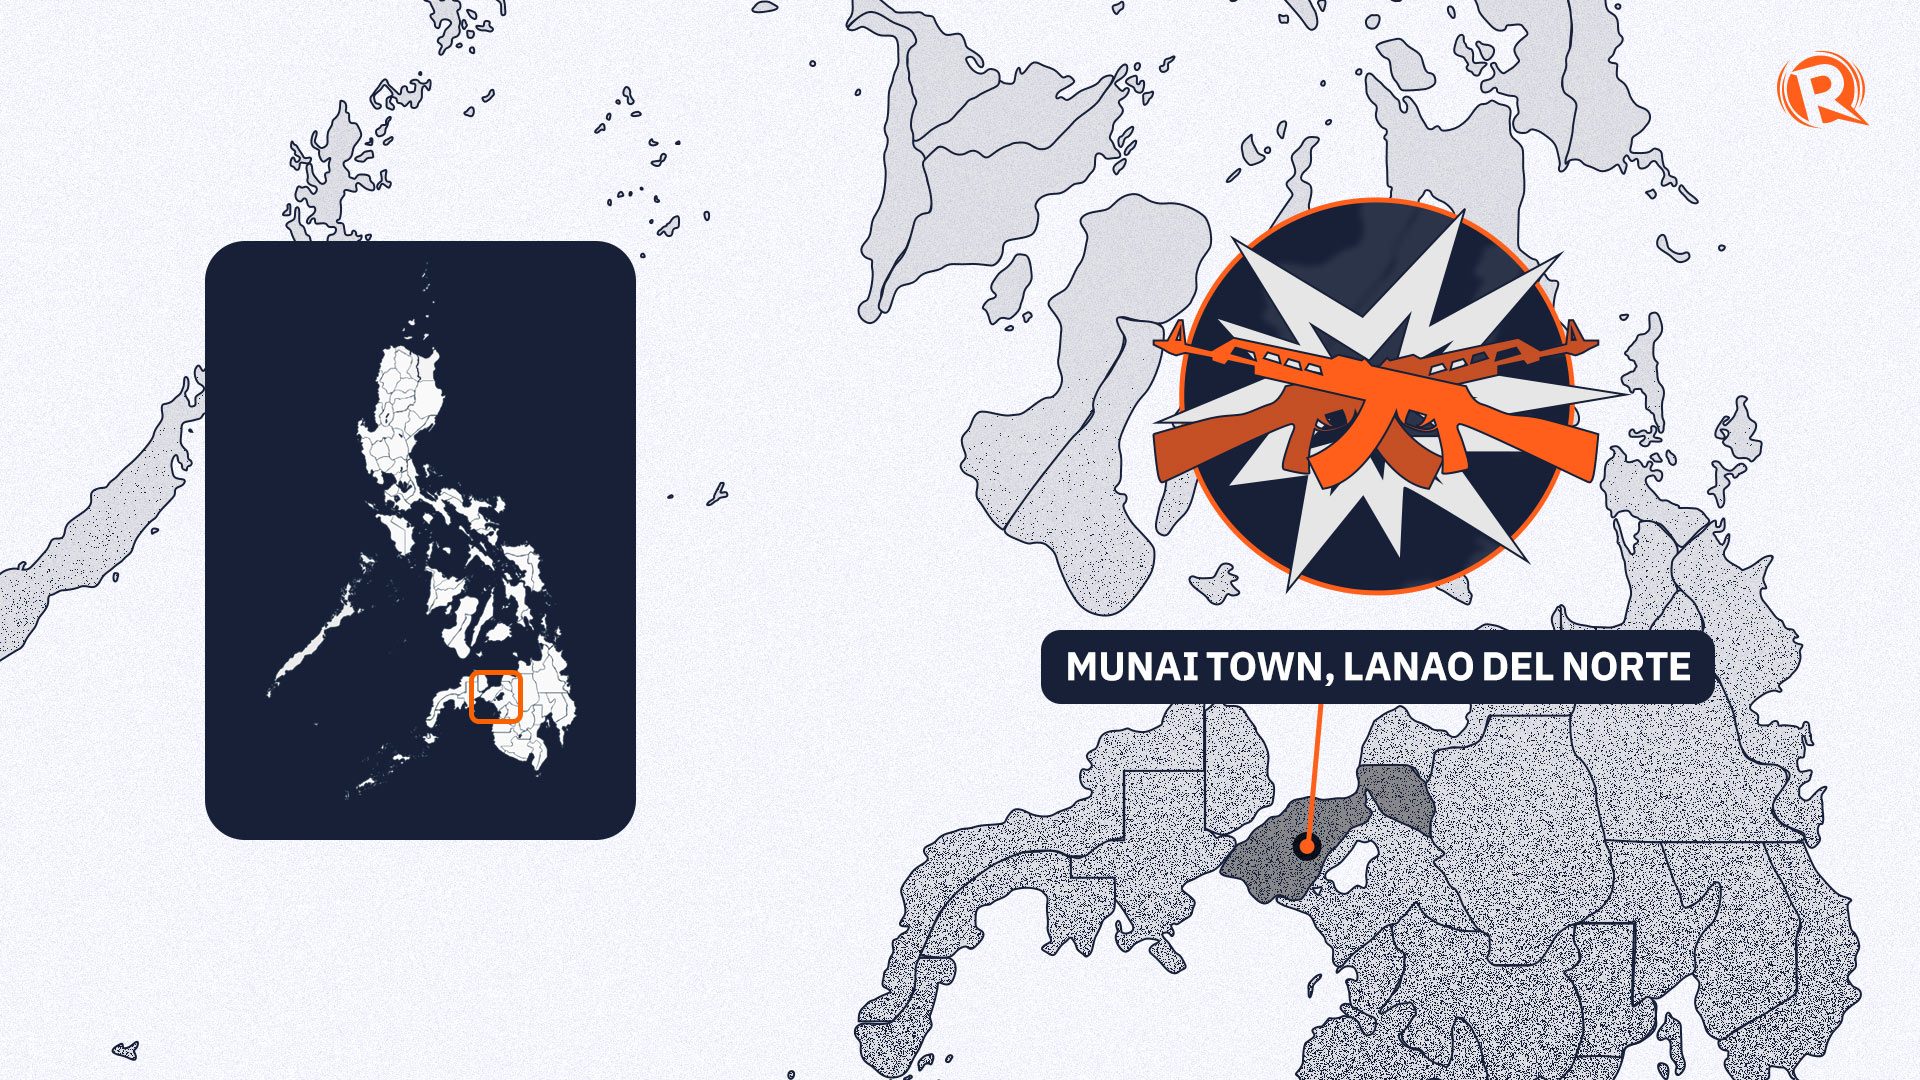 5 militants killed, 3 soldiers hurt in Lanao del Norte clashes